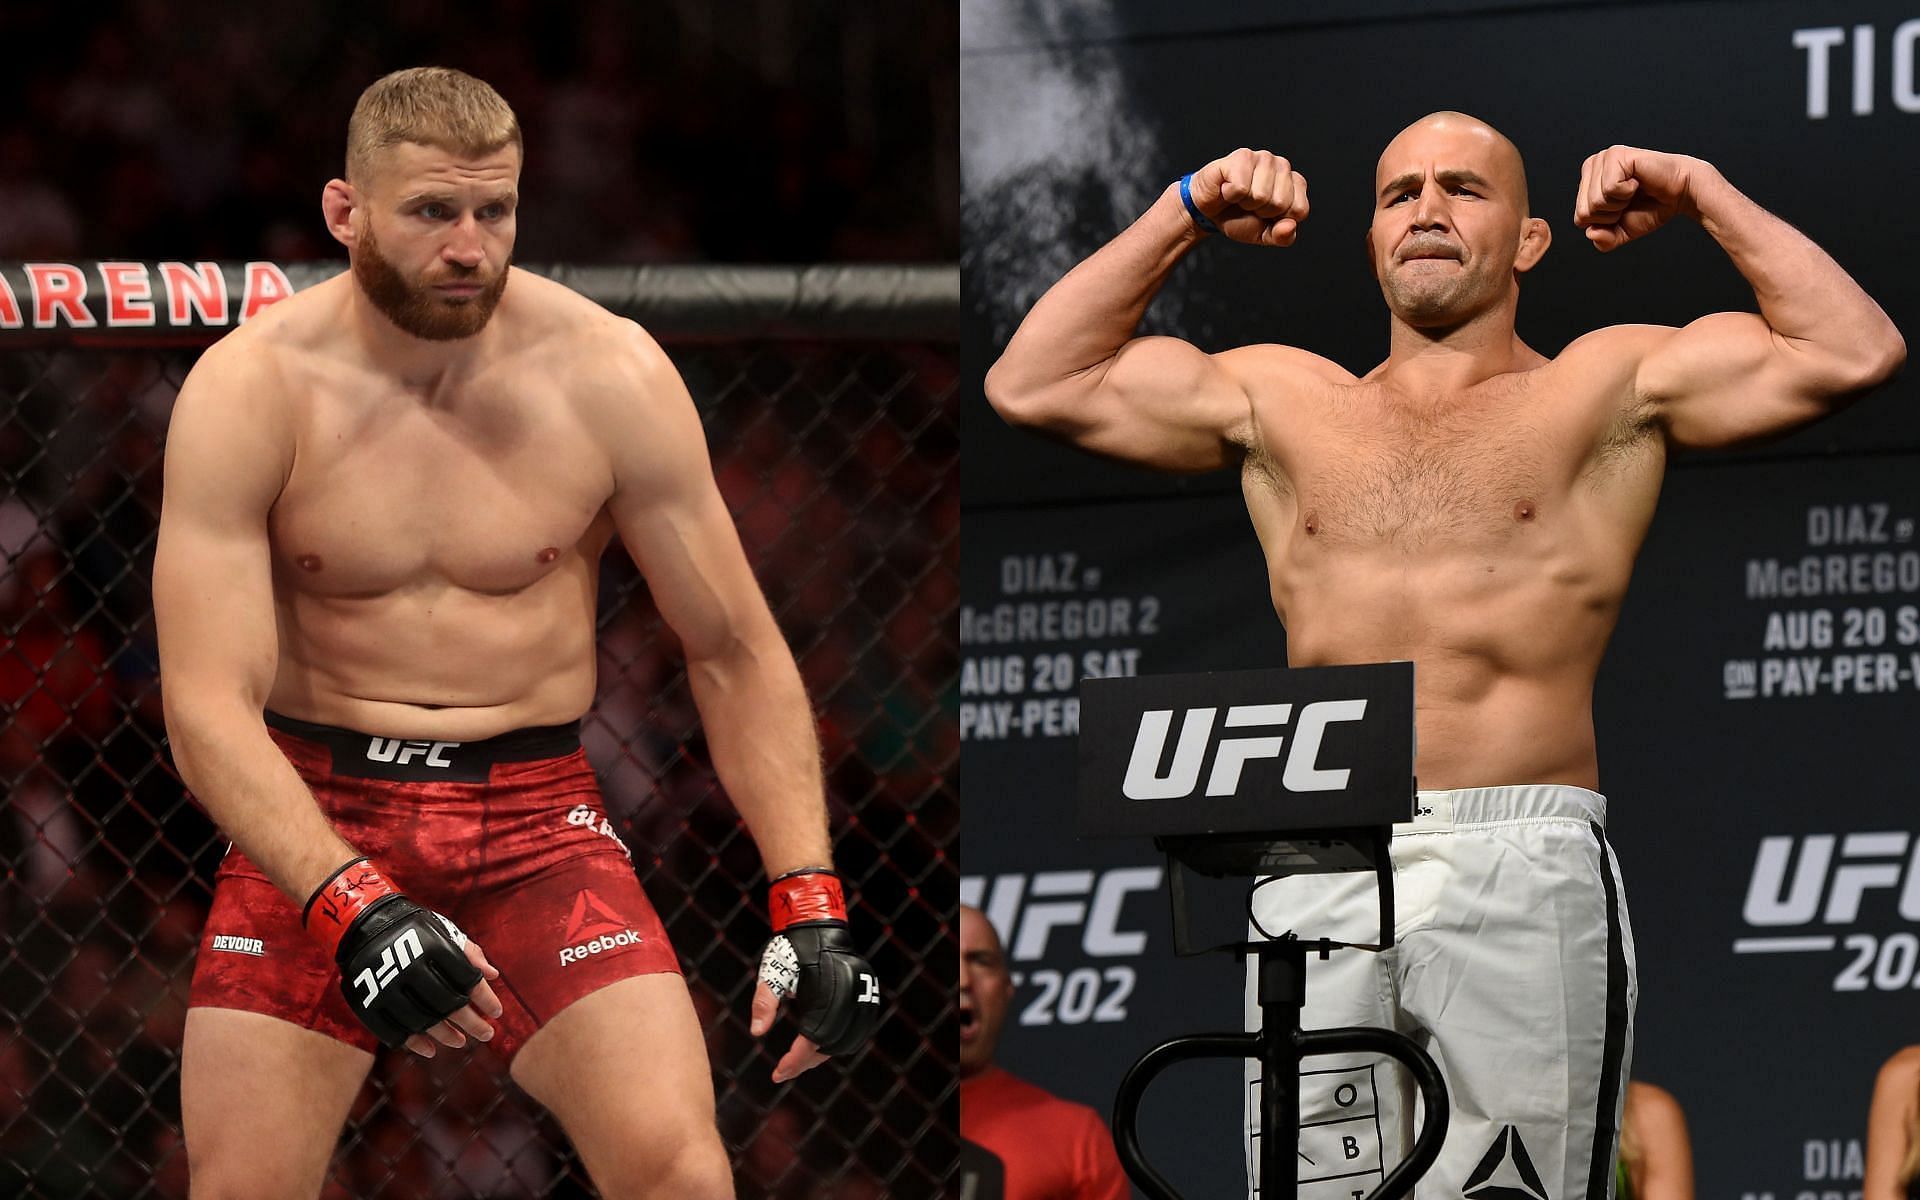 UFC light heavyweight champion Jan Blachowicz (left) and No.1 contender Glover Teixeira (right) will clash on Saturday.